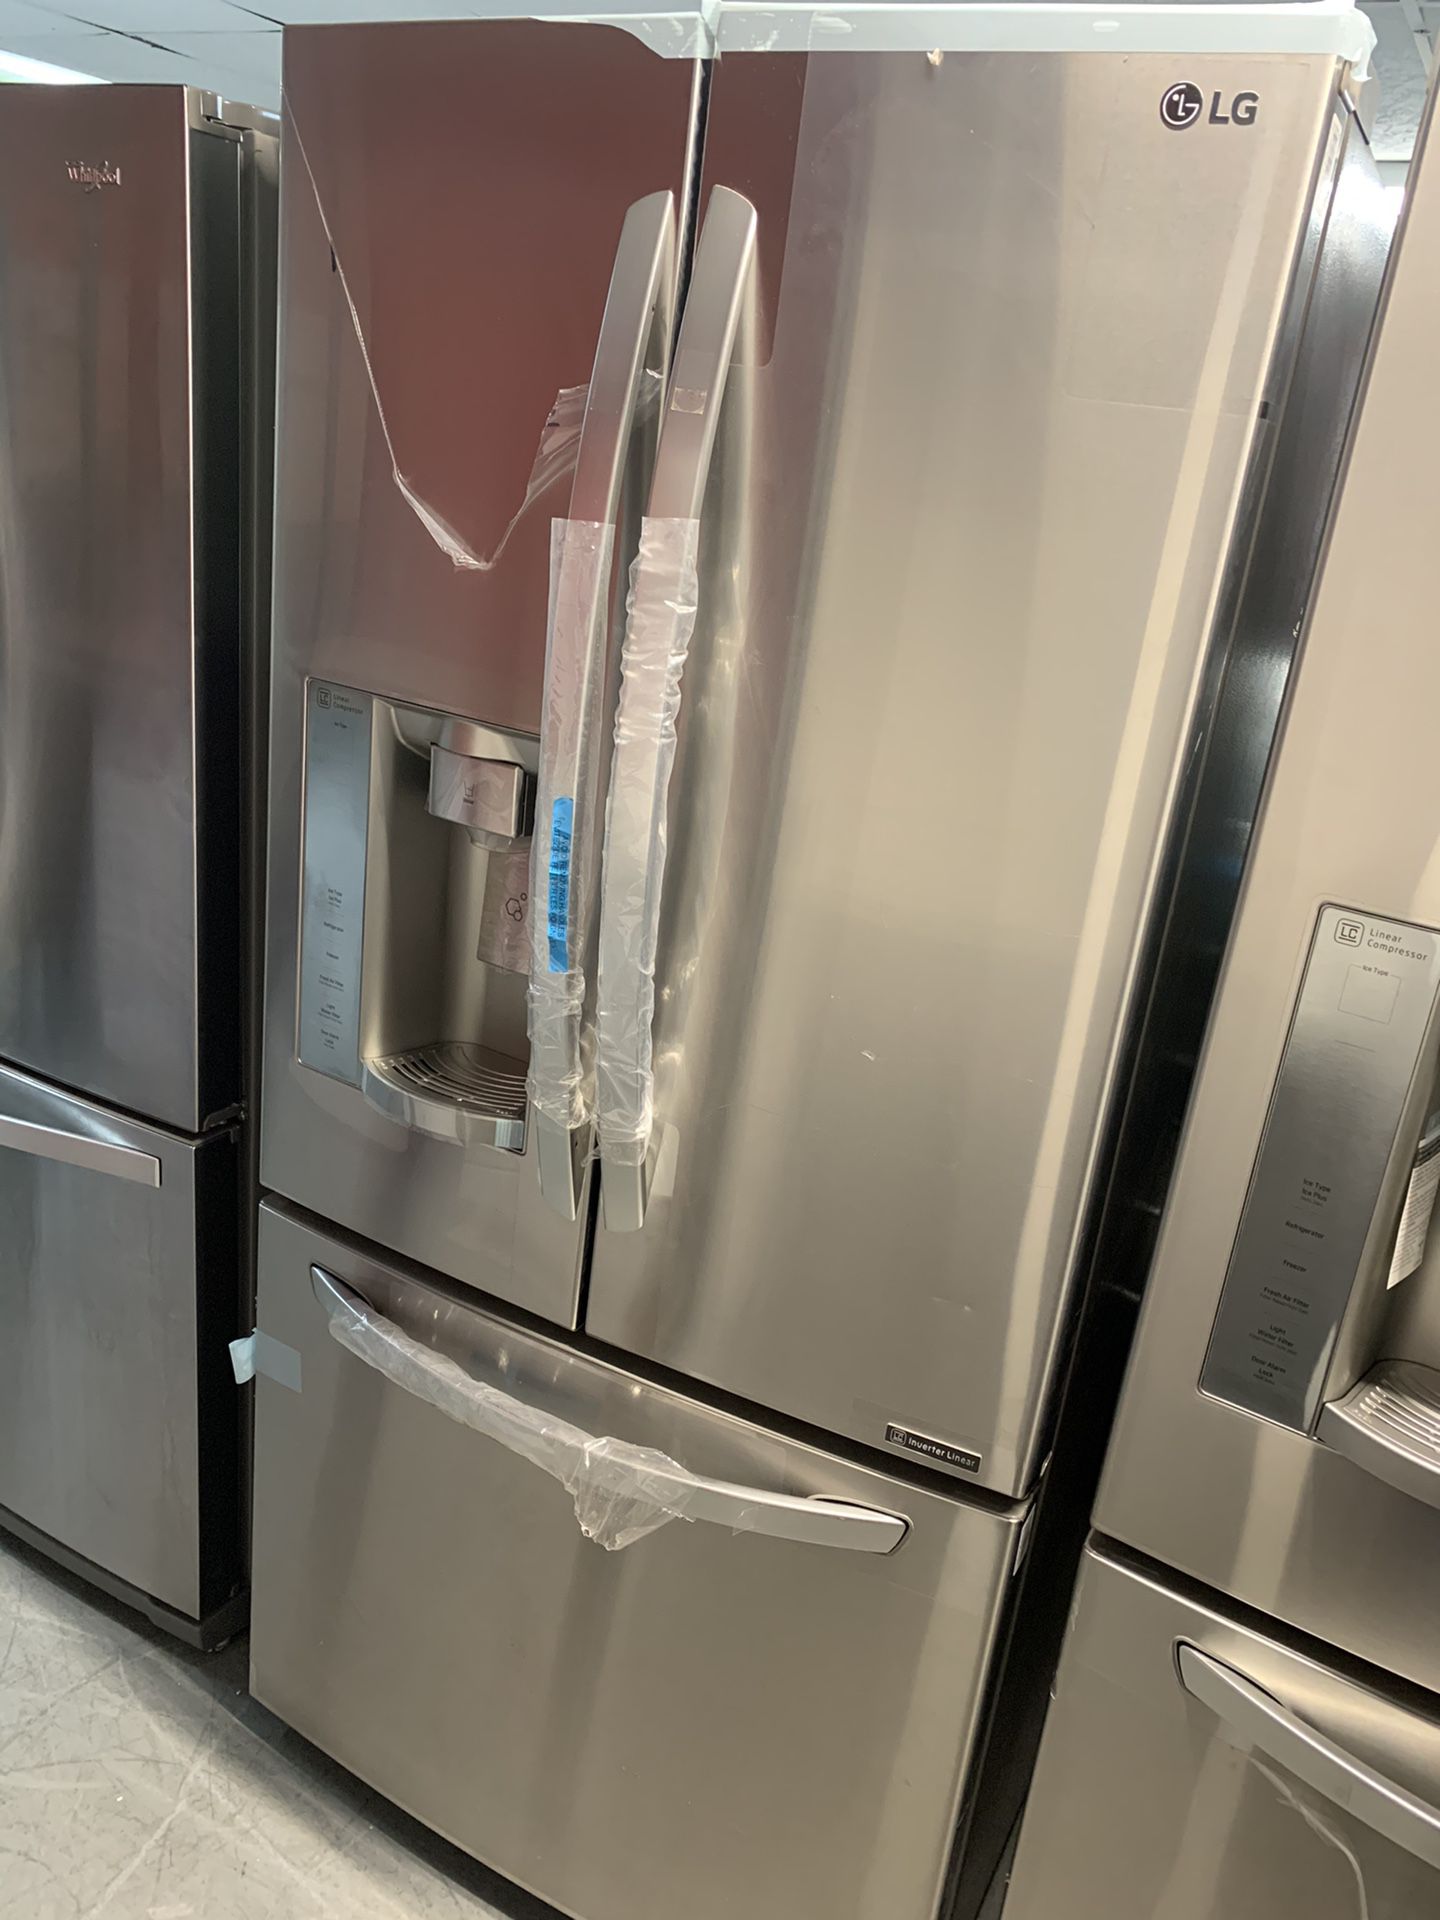 New scratch and dent lg 33” wide french door fridge stainless steel 1 year warranty